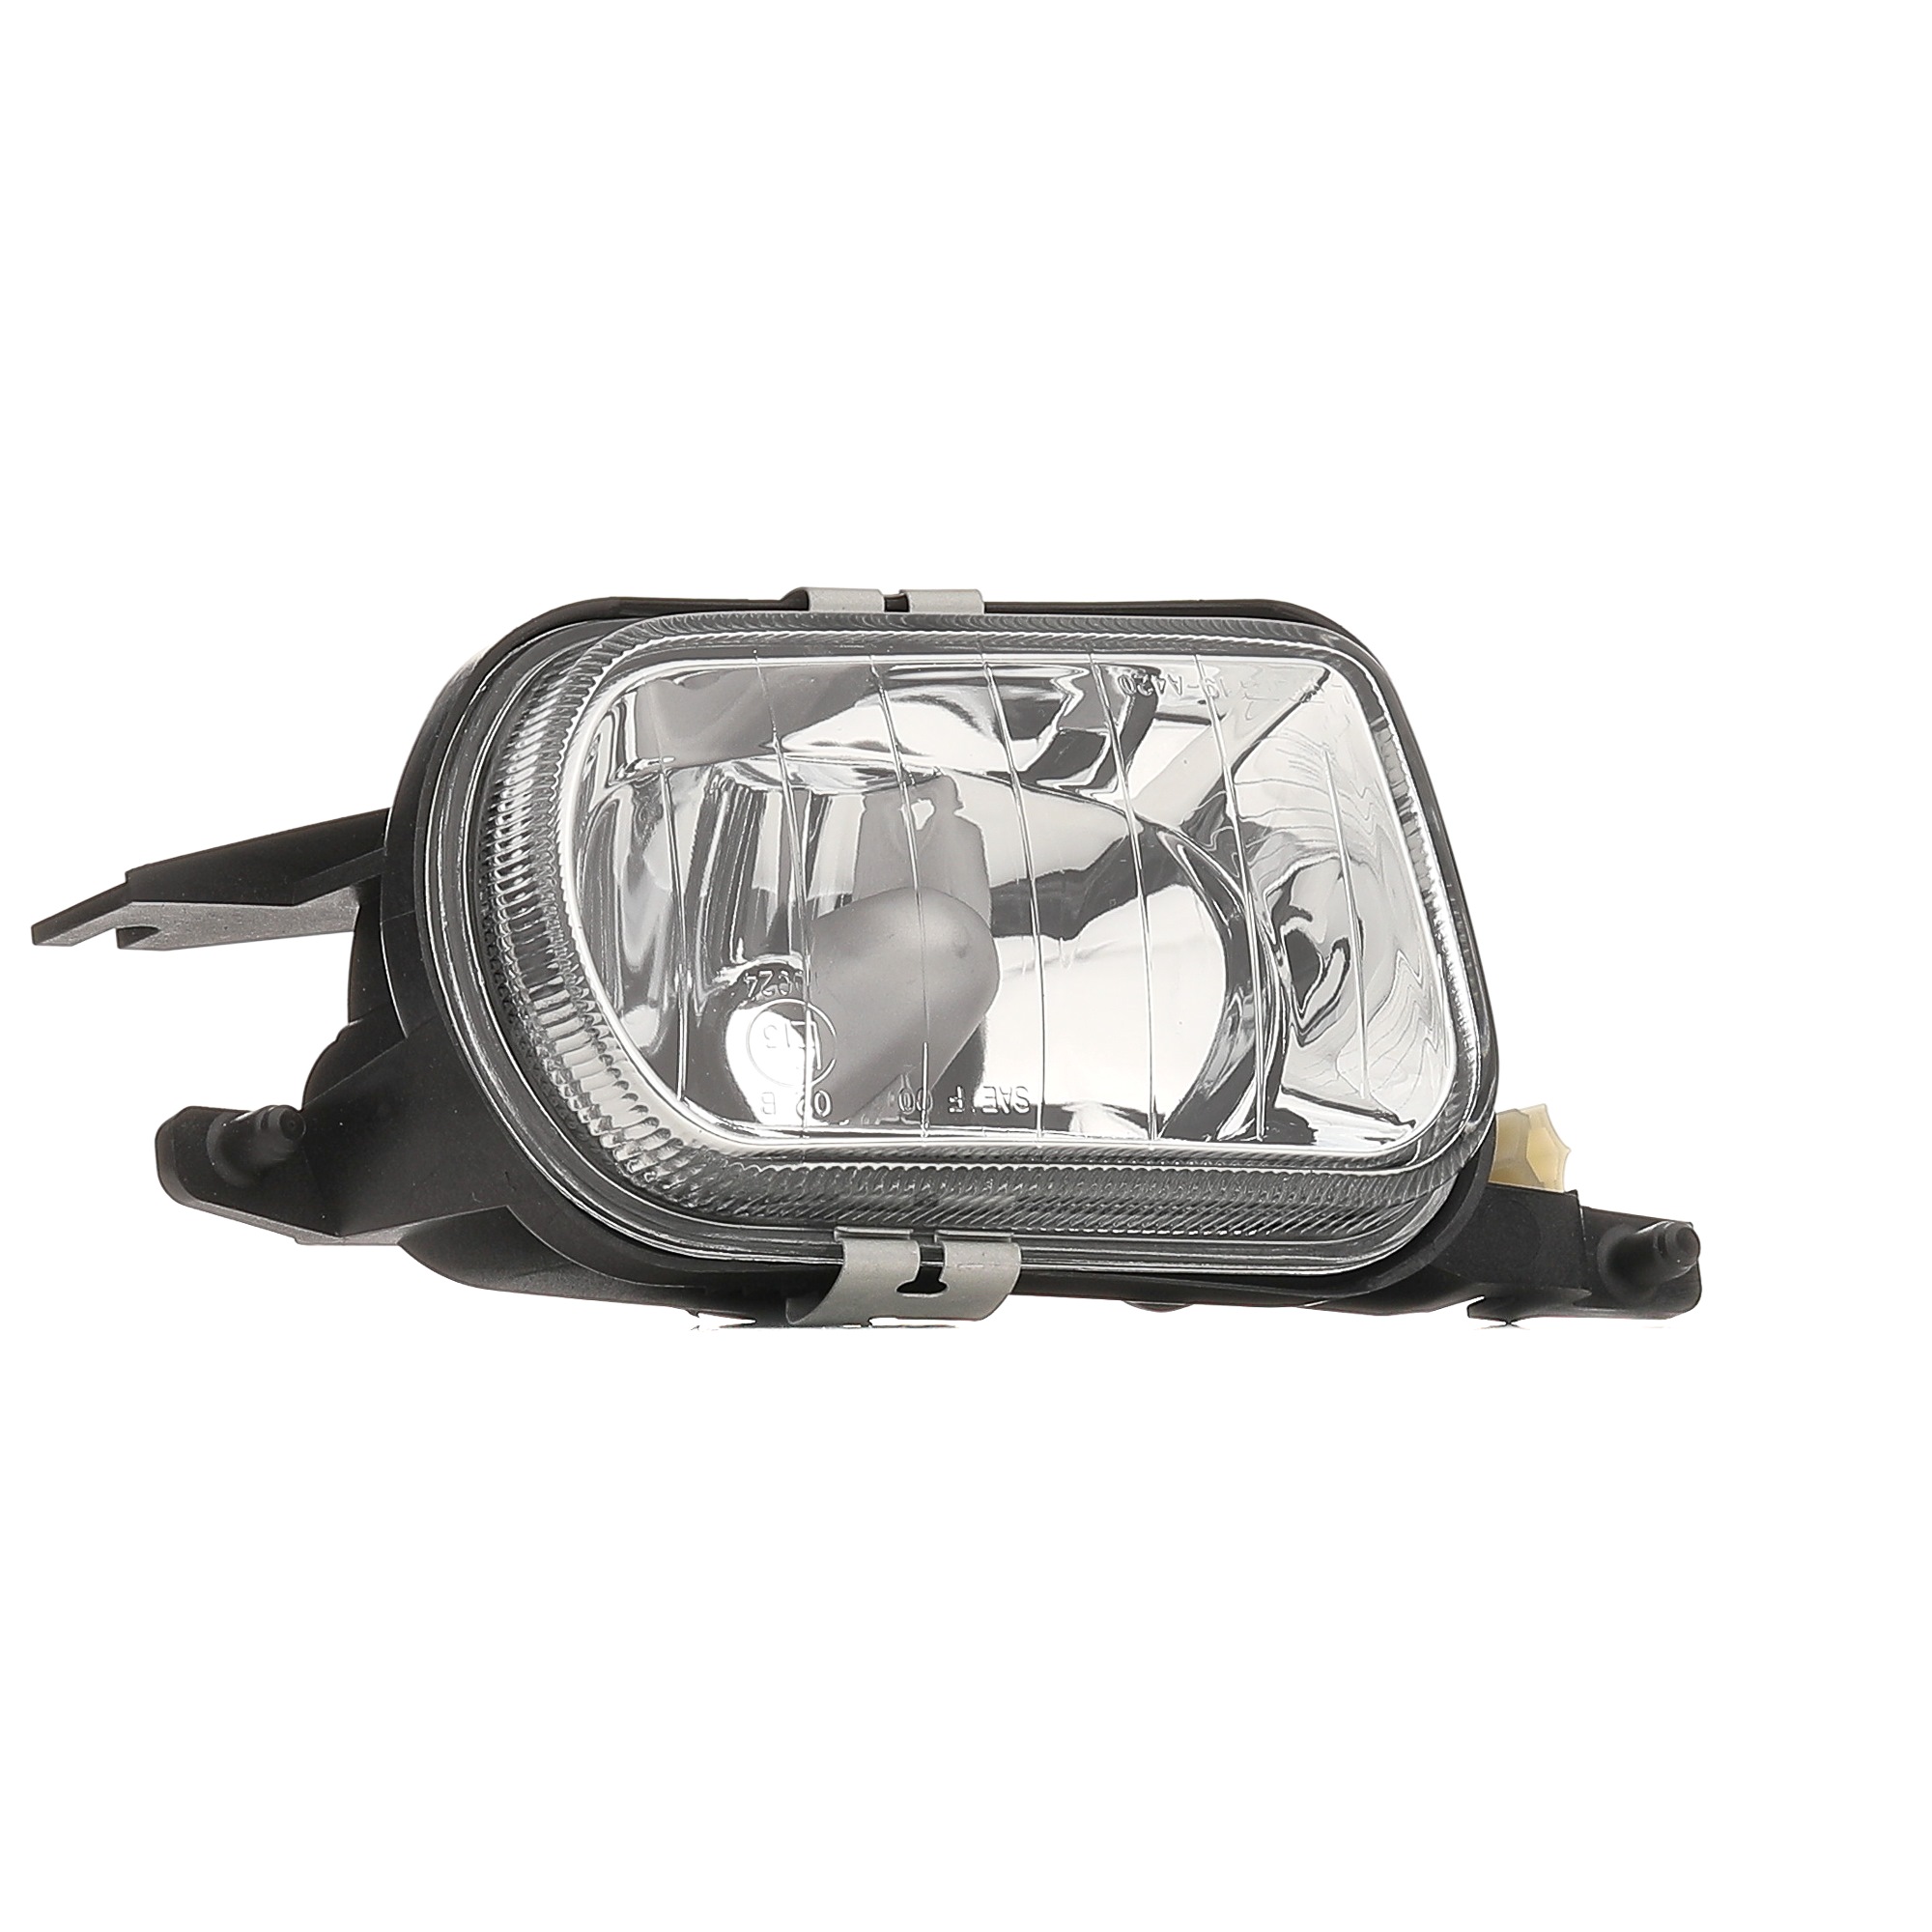 TYC Fog lamps rear and front E-Class Platform / Chassis (VF211) new 19-0420-01-9